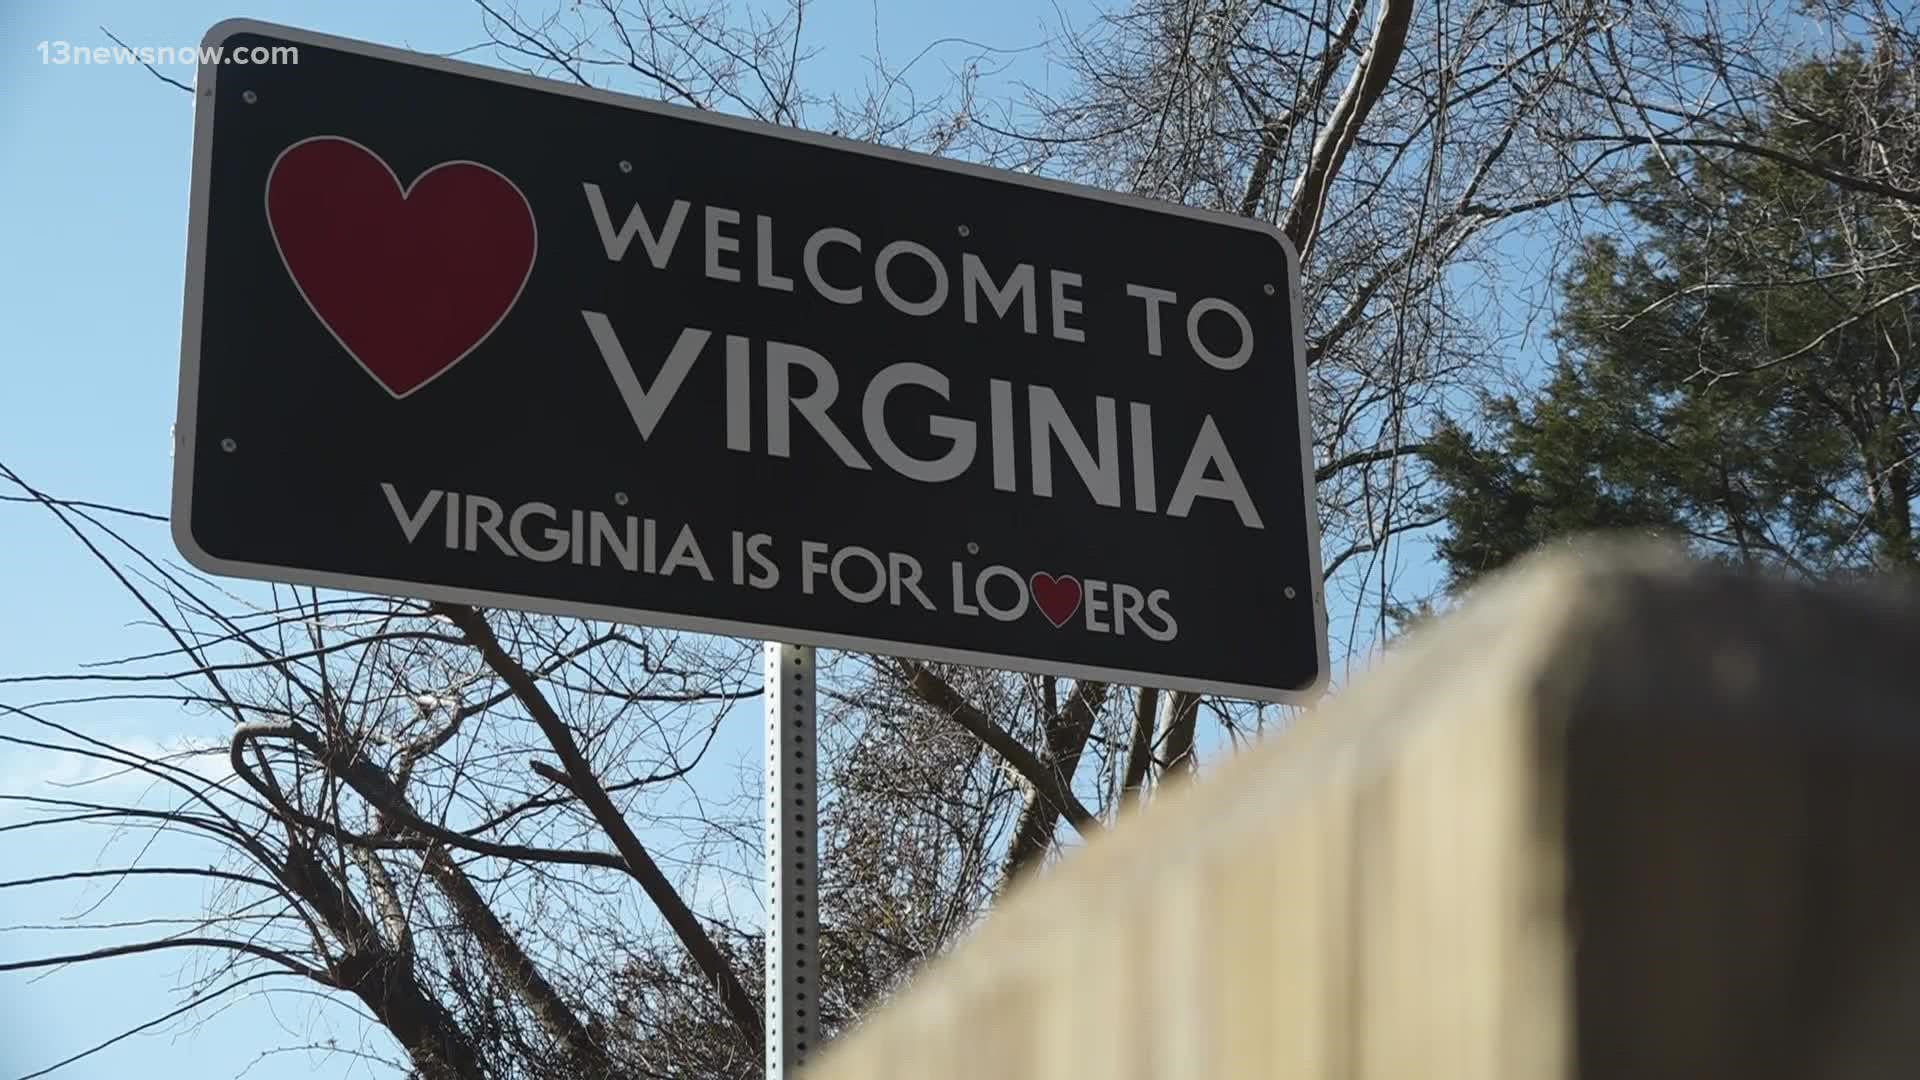 It’s Virginia’s most well-known slogan, but where does it actually come from?